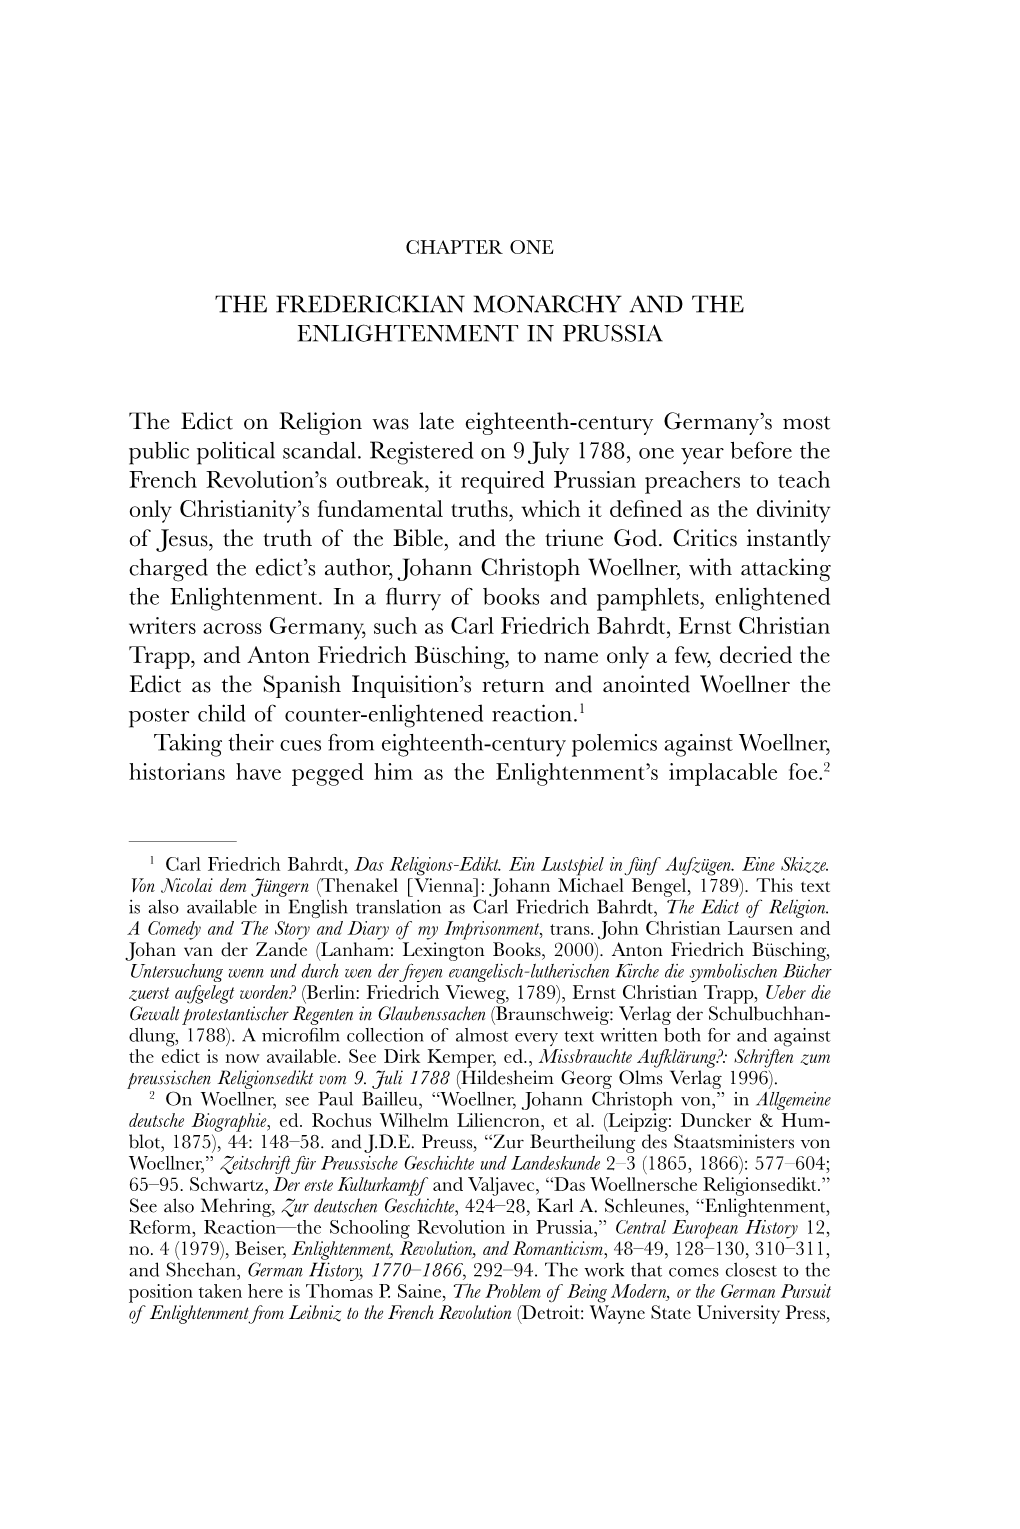 The Frederickian Monarchy and the Enlightenment in Prussia